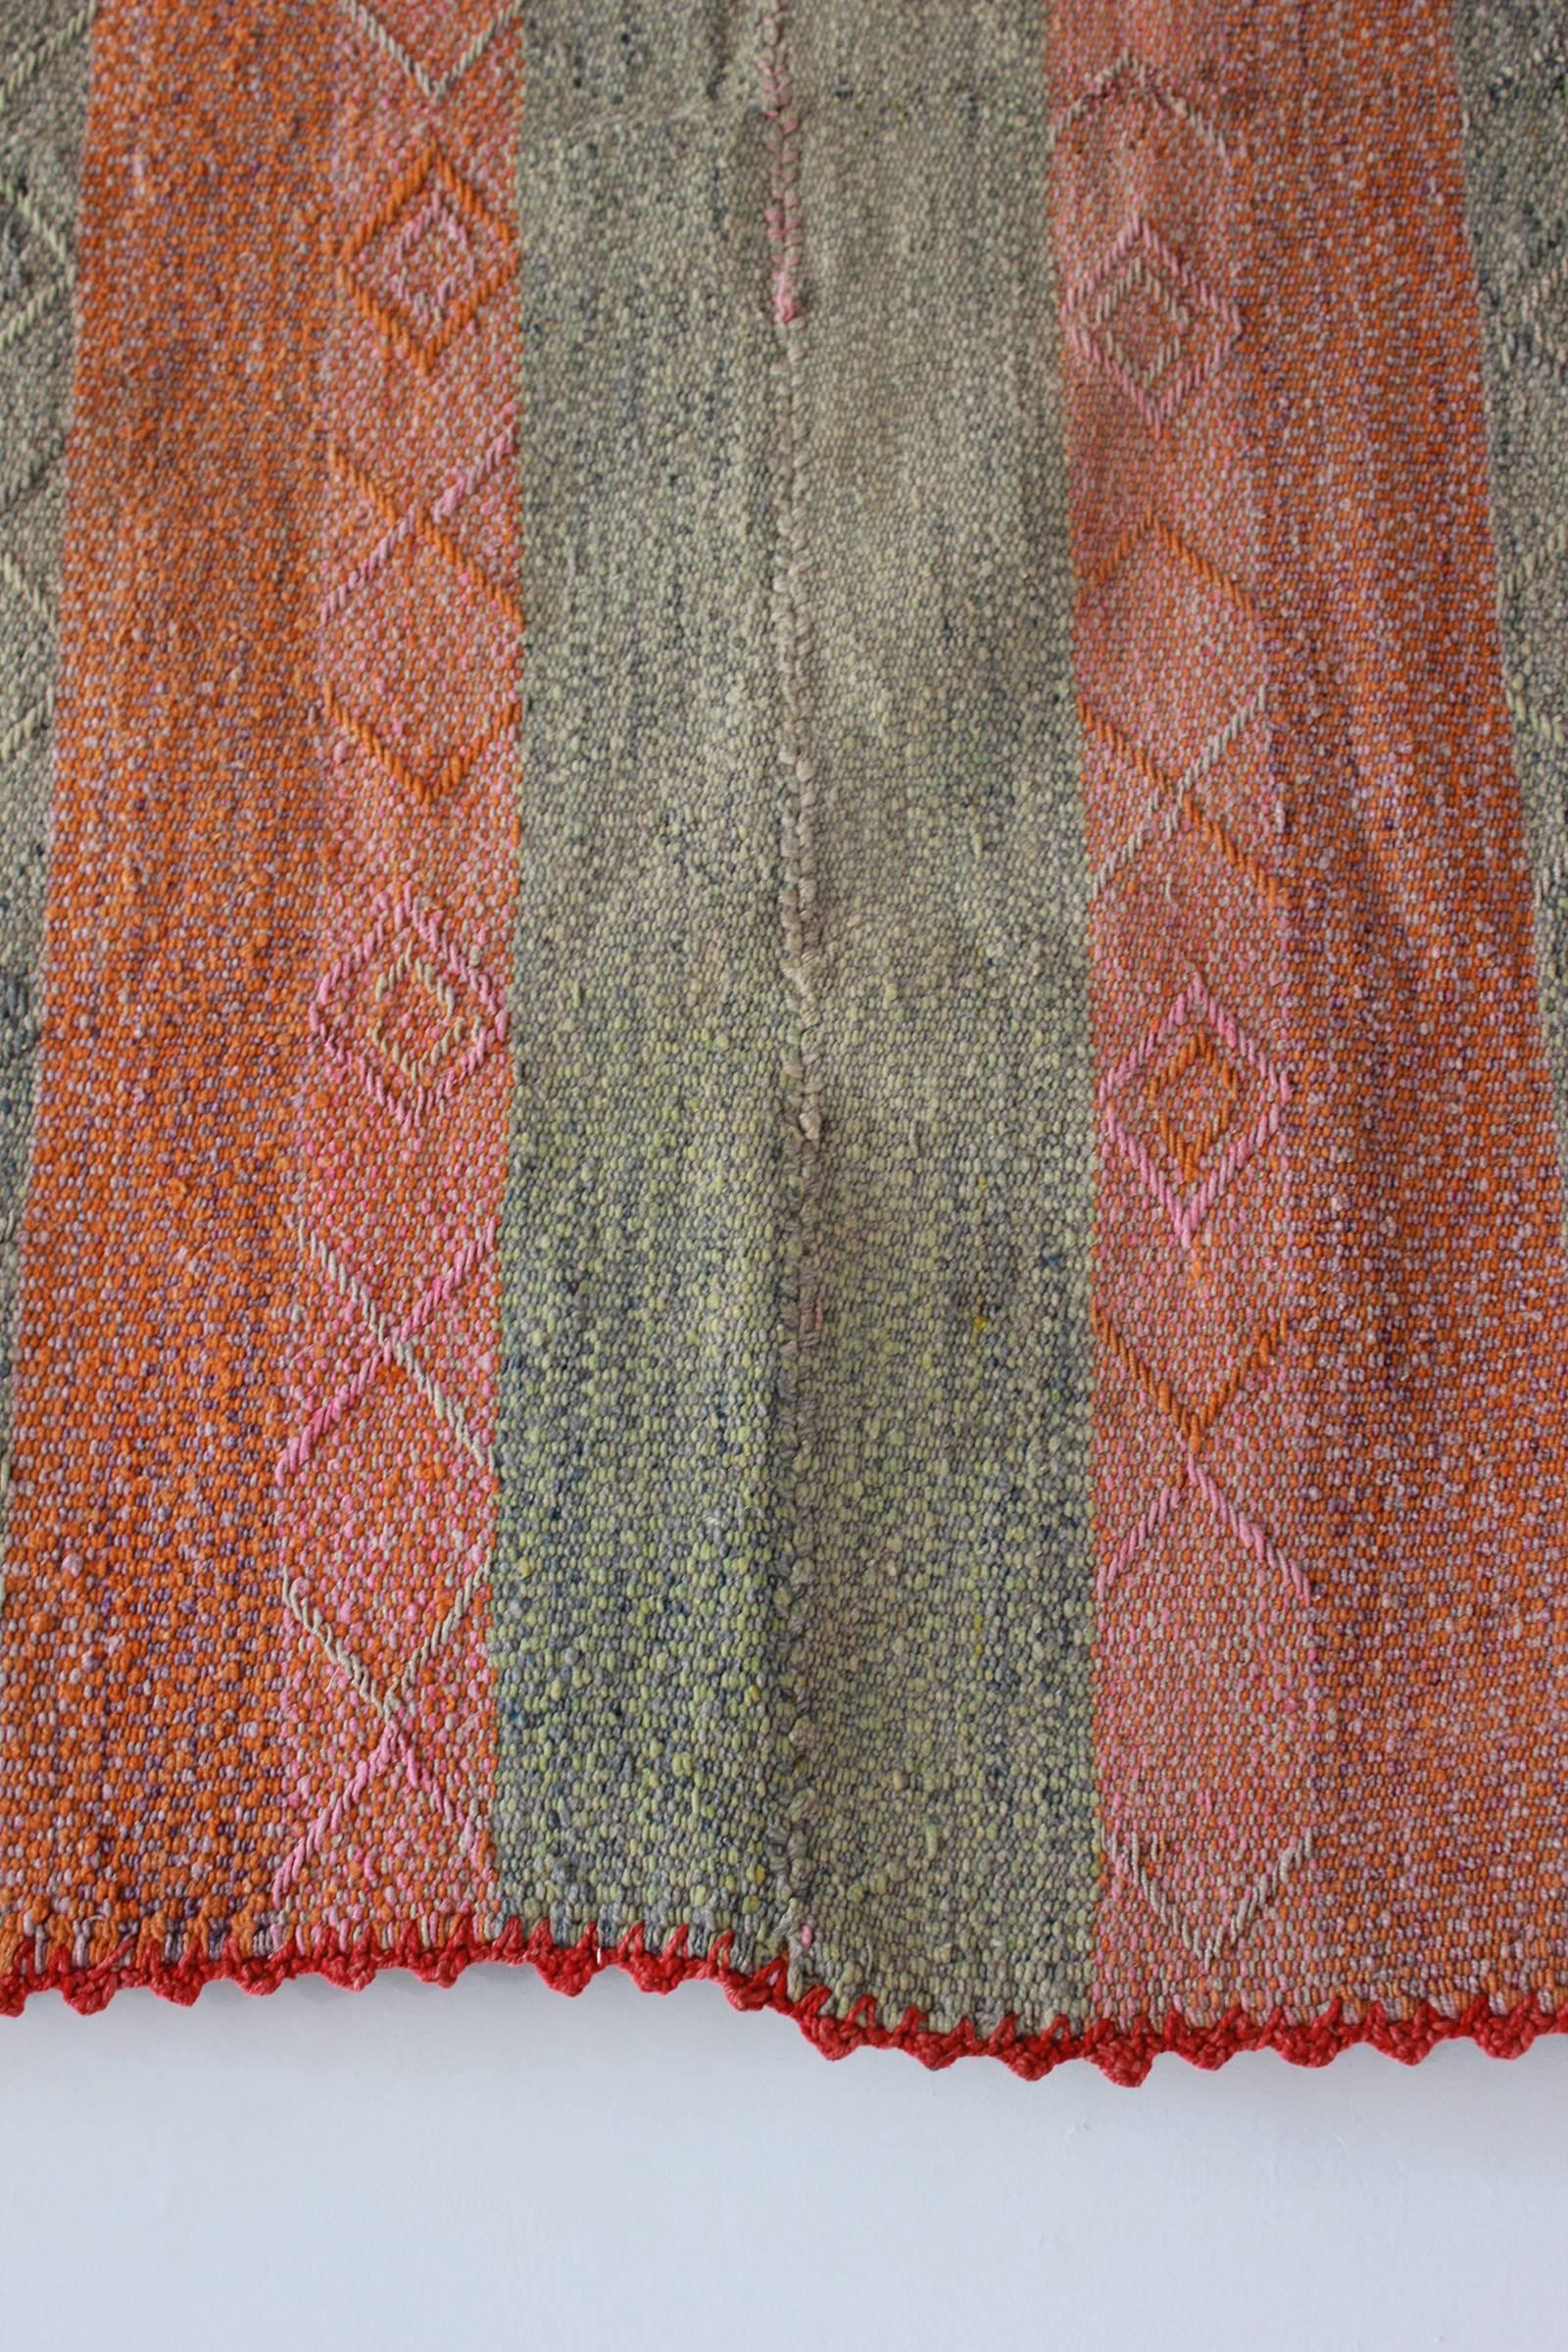 Mid-20th Century Peruvian Striped Orange Pink and Sage Colored Cuzco Wool Textile